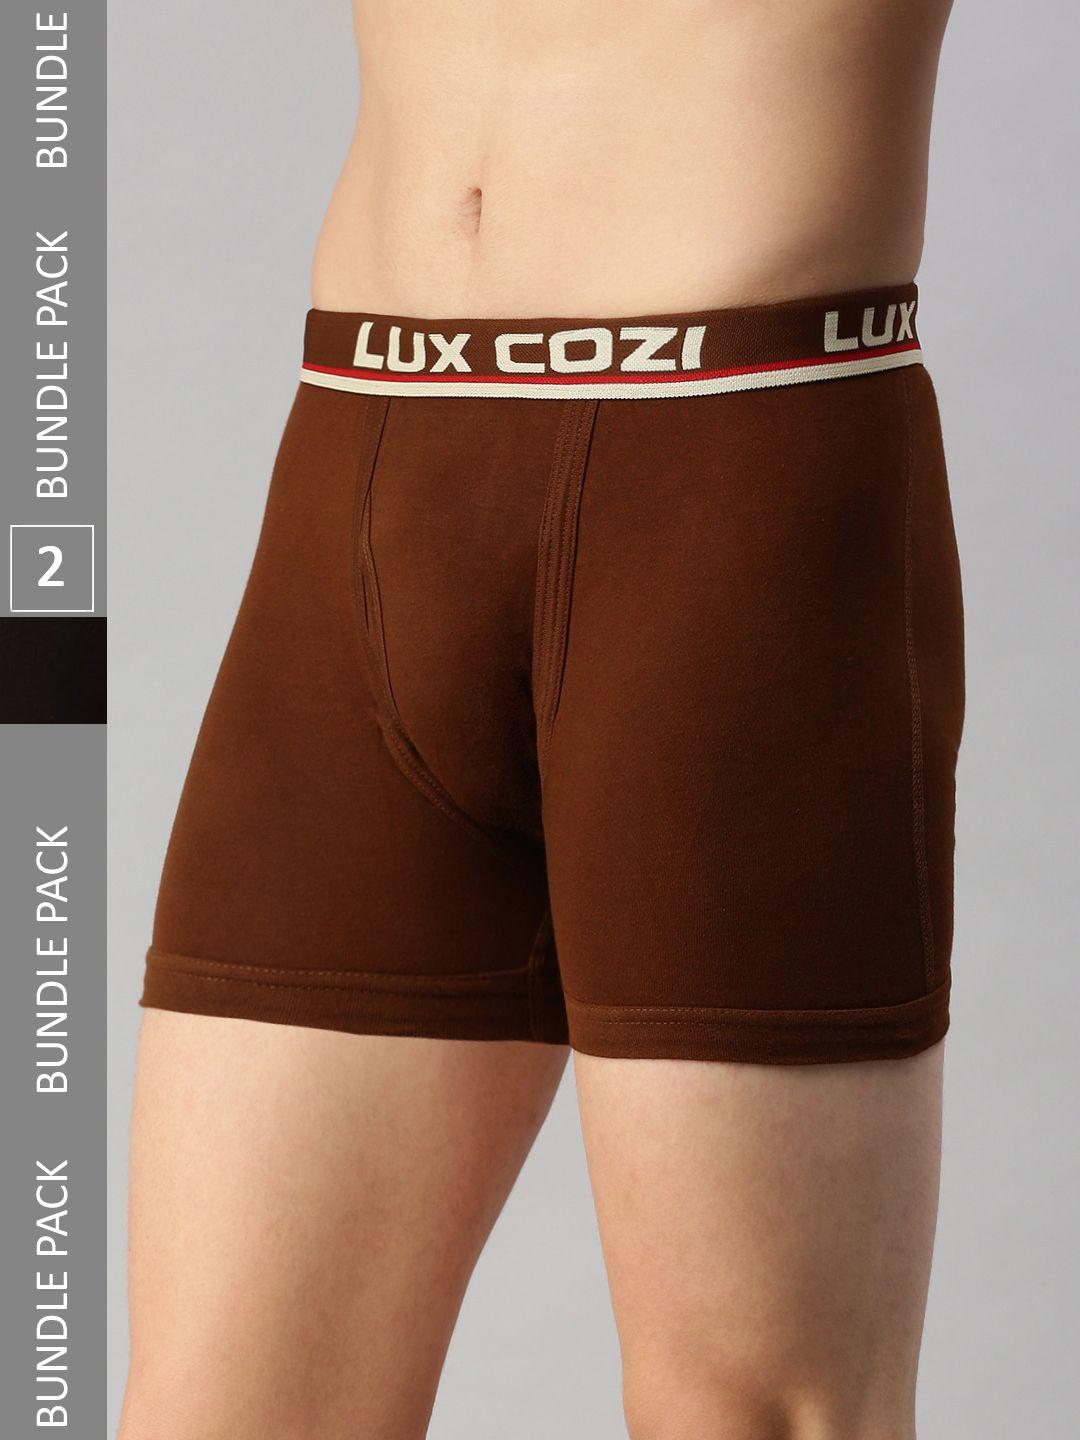 lux cozi pack of 2 ribbed cotton sleek and comfortable trunks